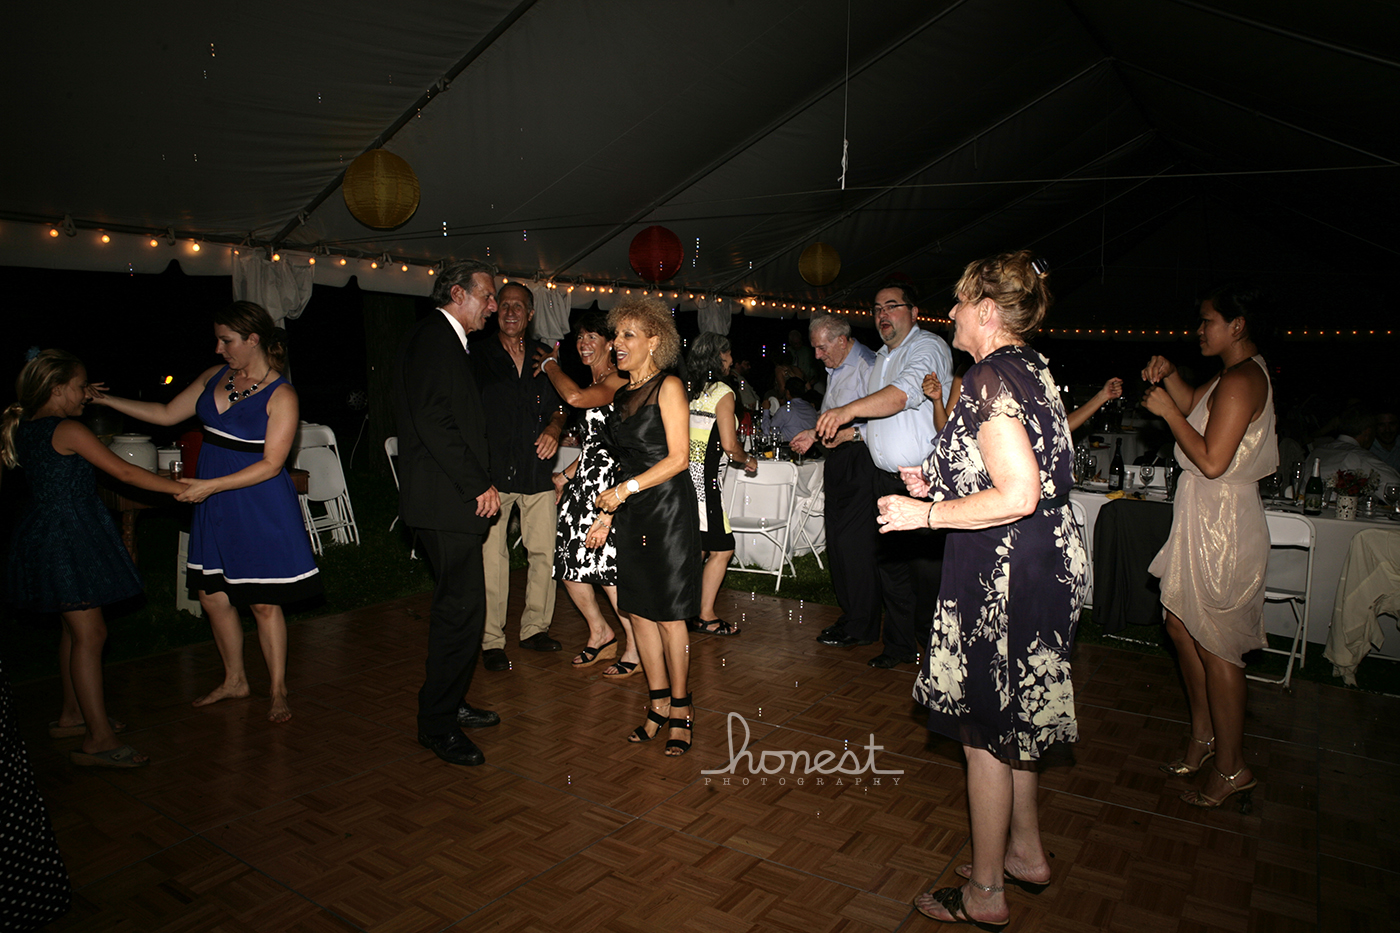 a group of people dancing at a social event